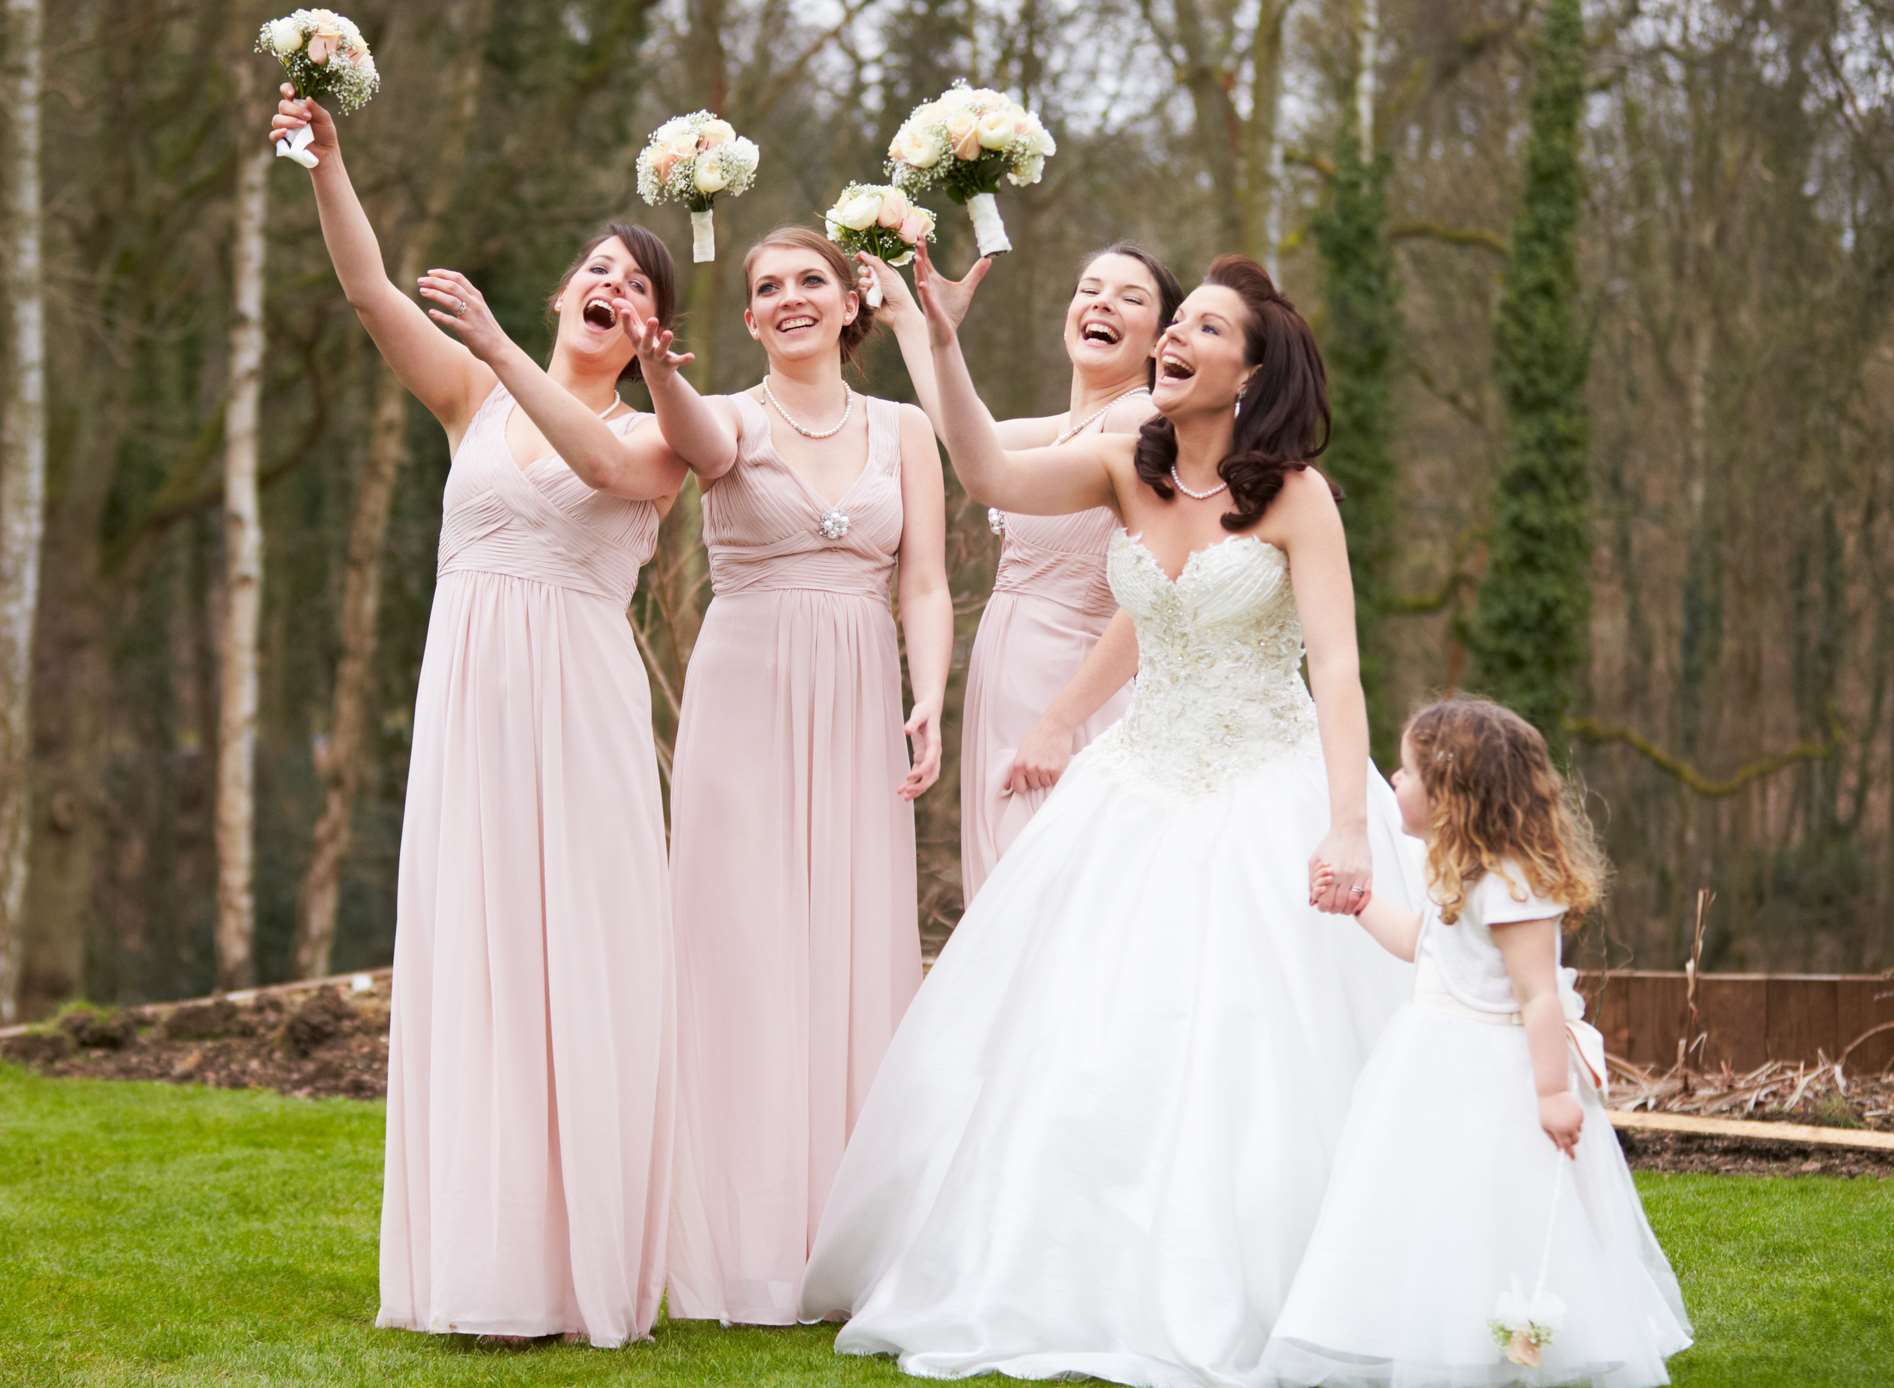 1. Decide how you want their dresses to complement your own. There is a careful balance between ensuring bridesmaids’ dresses evoke the style of the bride without looking too much like the bride.